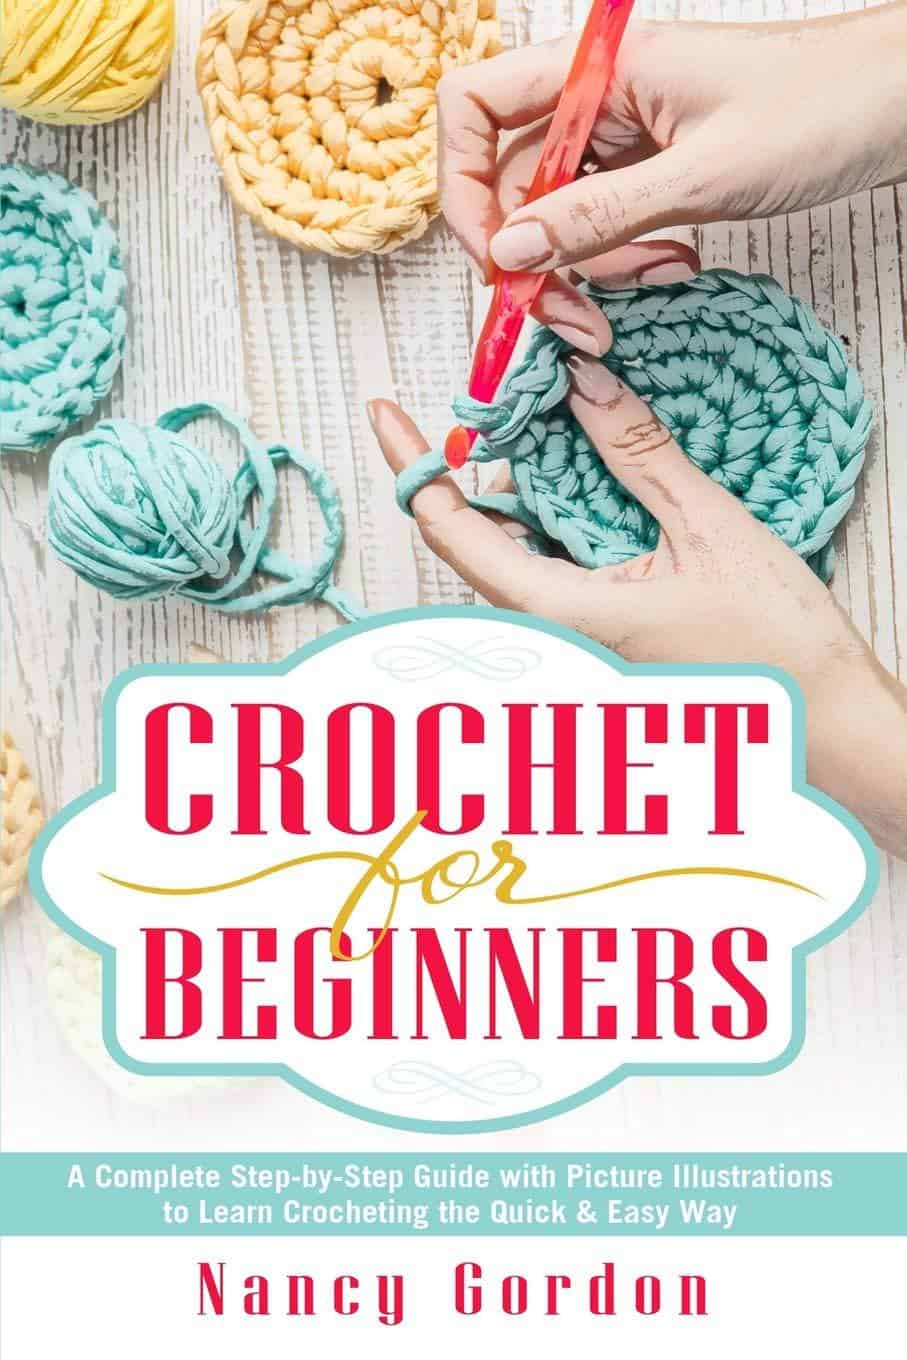 How to Crochet for the Absolute Beginner Book Review